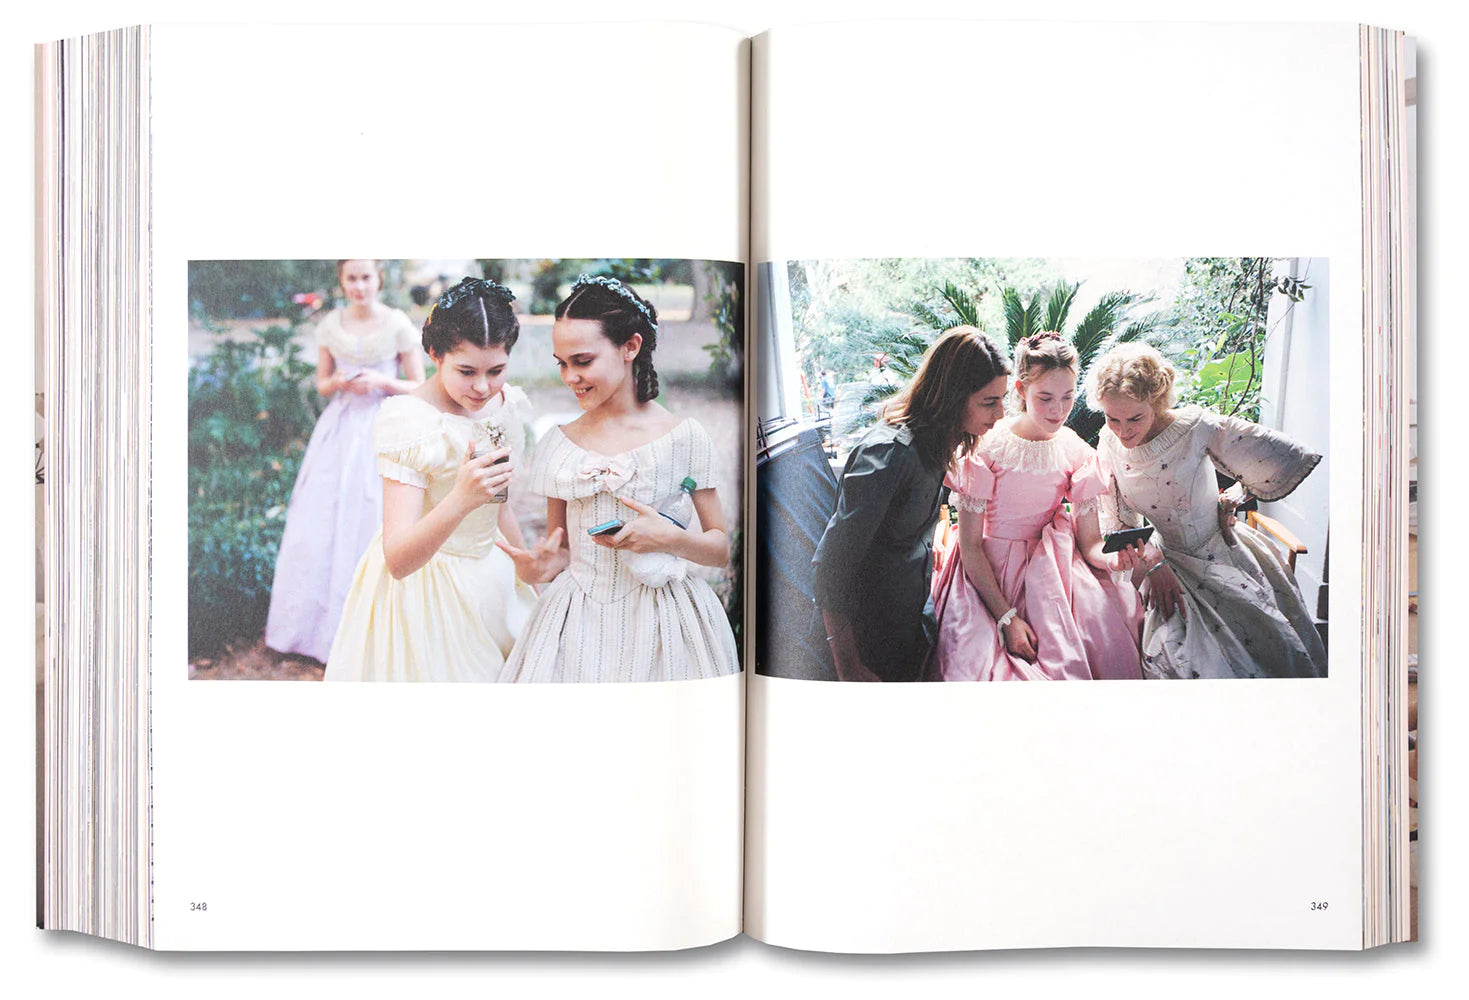 Sofia coppola - Archive Signed Special Limited Edition Only 300 Copies